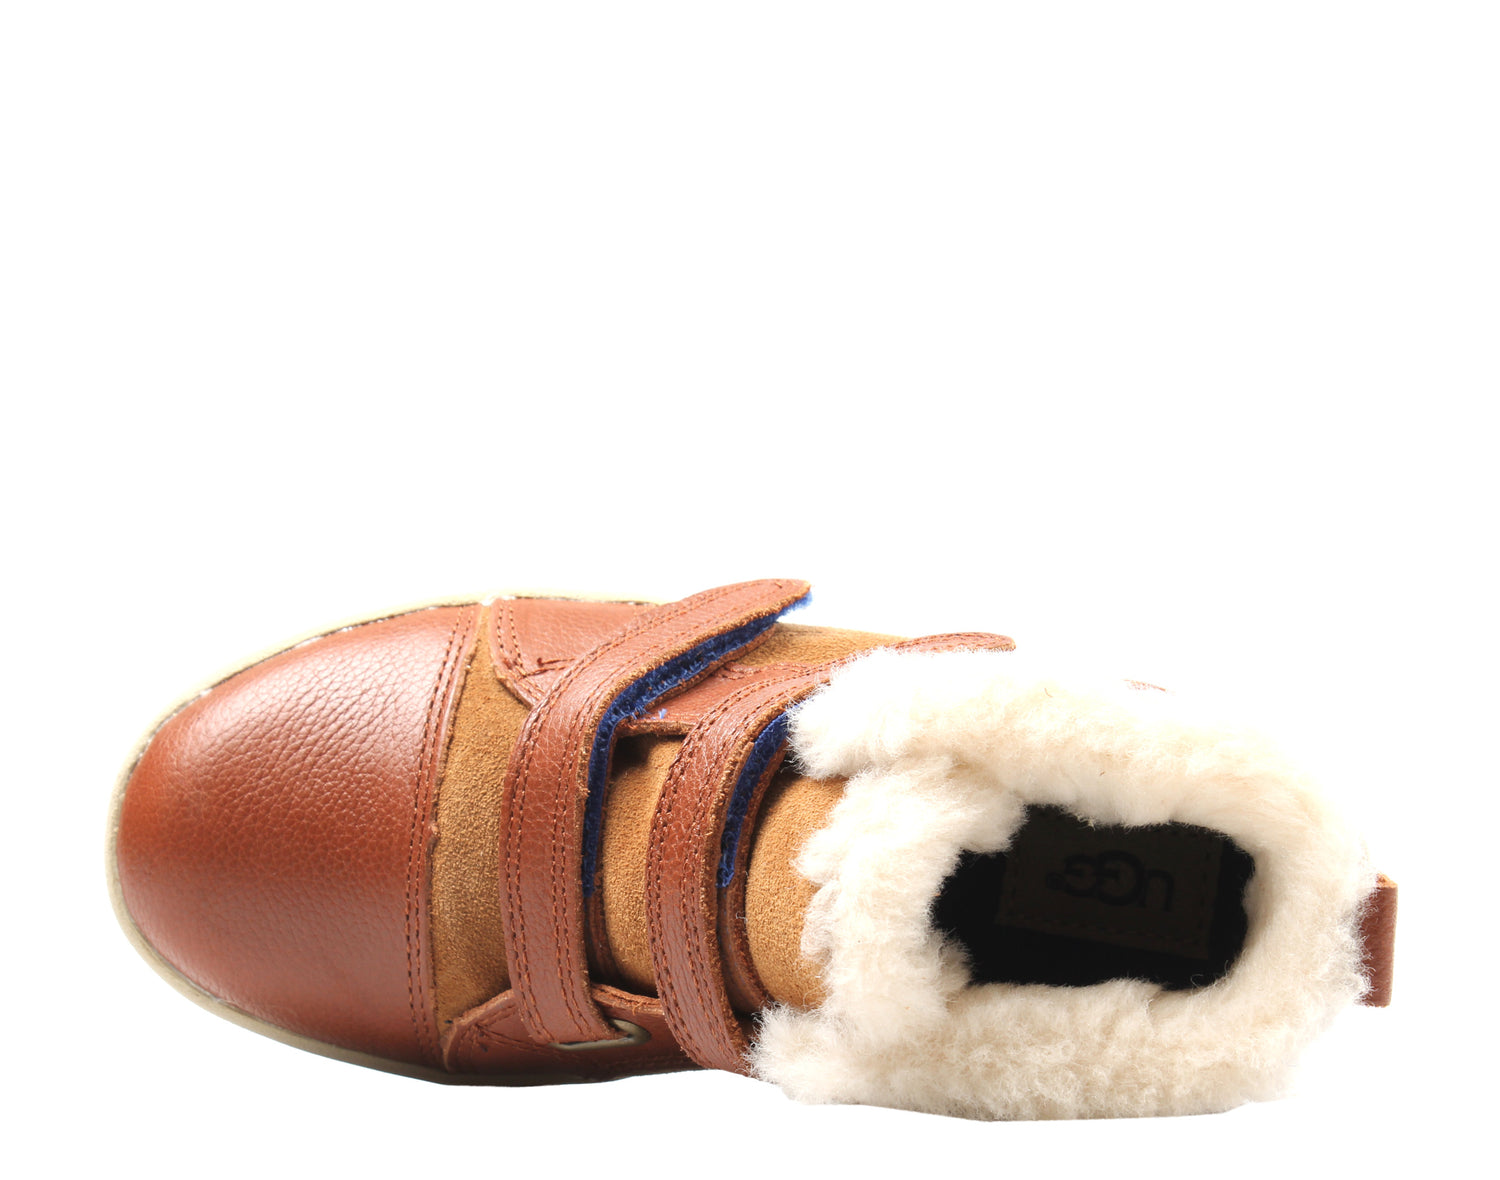 UGG Australia Rennon Toddlers Shoes